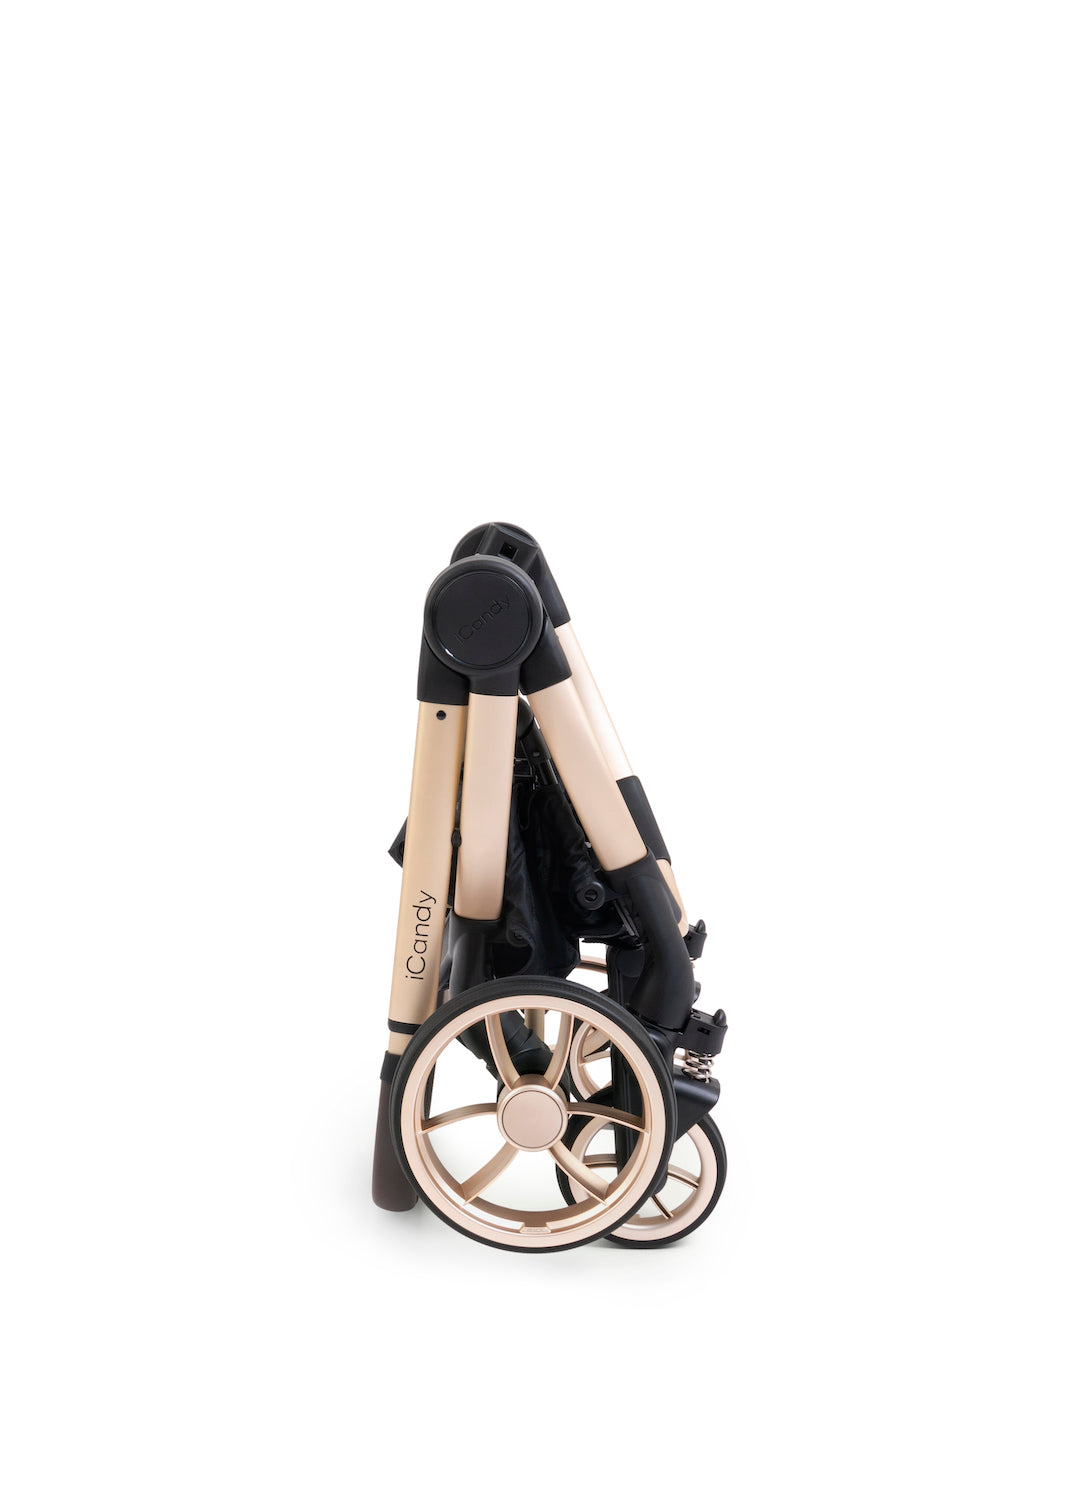 iCandy Peach 7 Pushchair & Maxi Cosi Pebble 360 PRO Travel System Bundle - Biscotti | Blonde Chassis